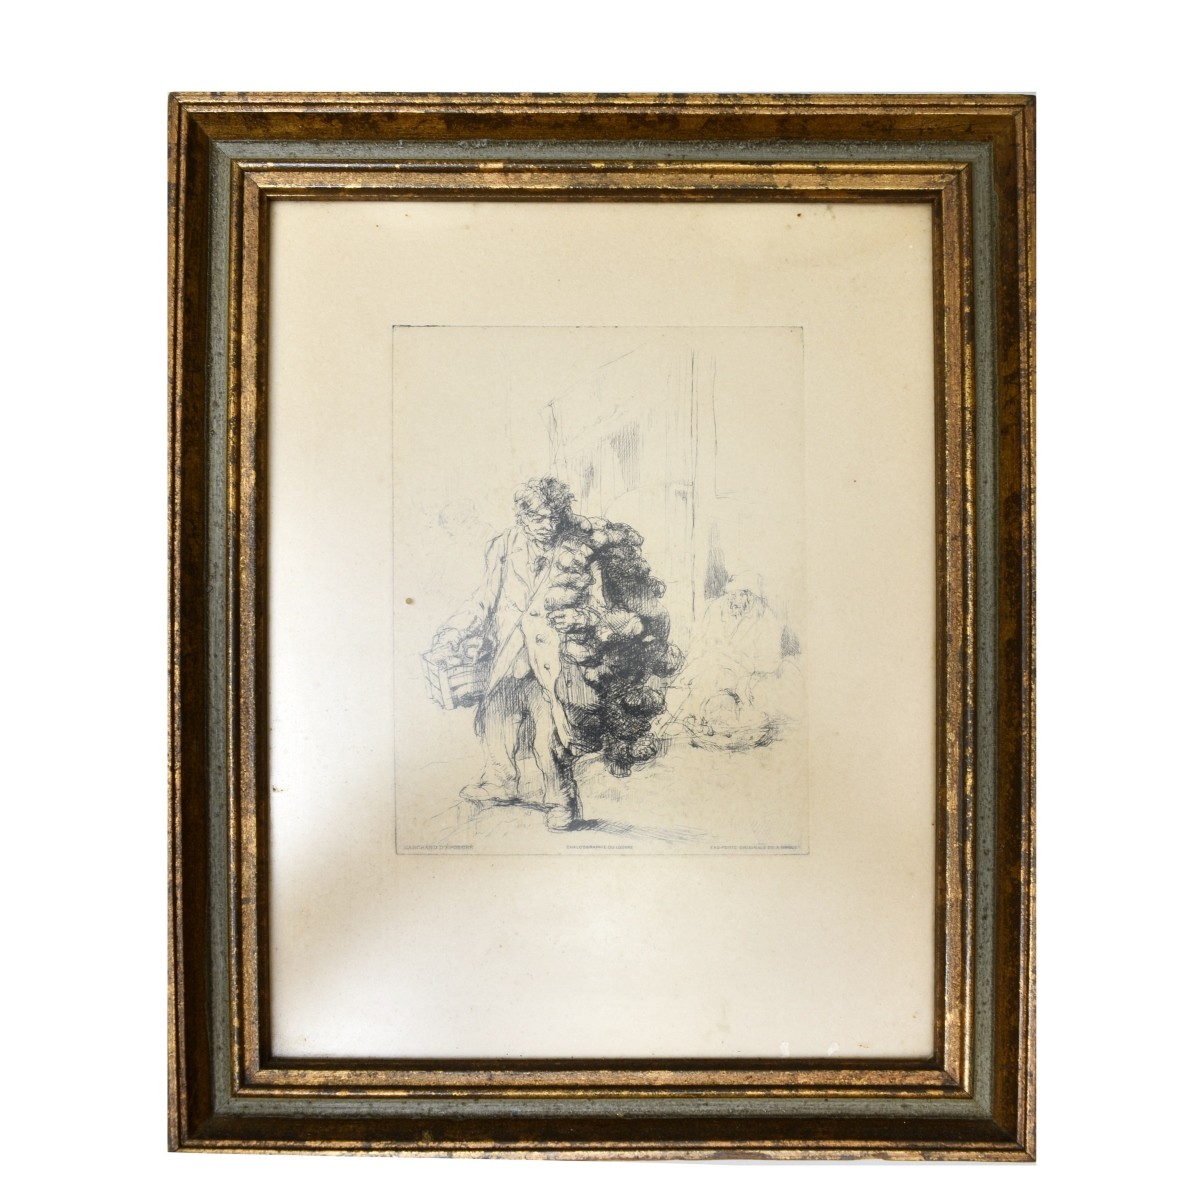 After: August Brouet (1872 - 1941) Etching